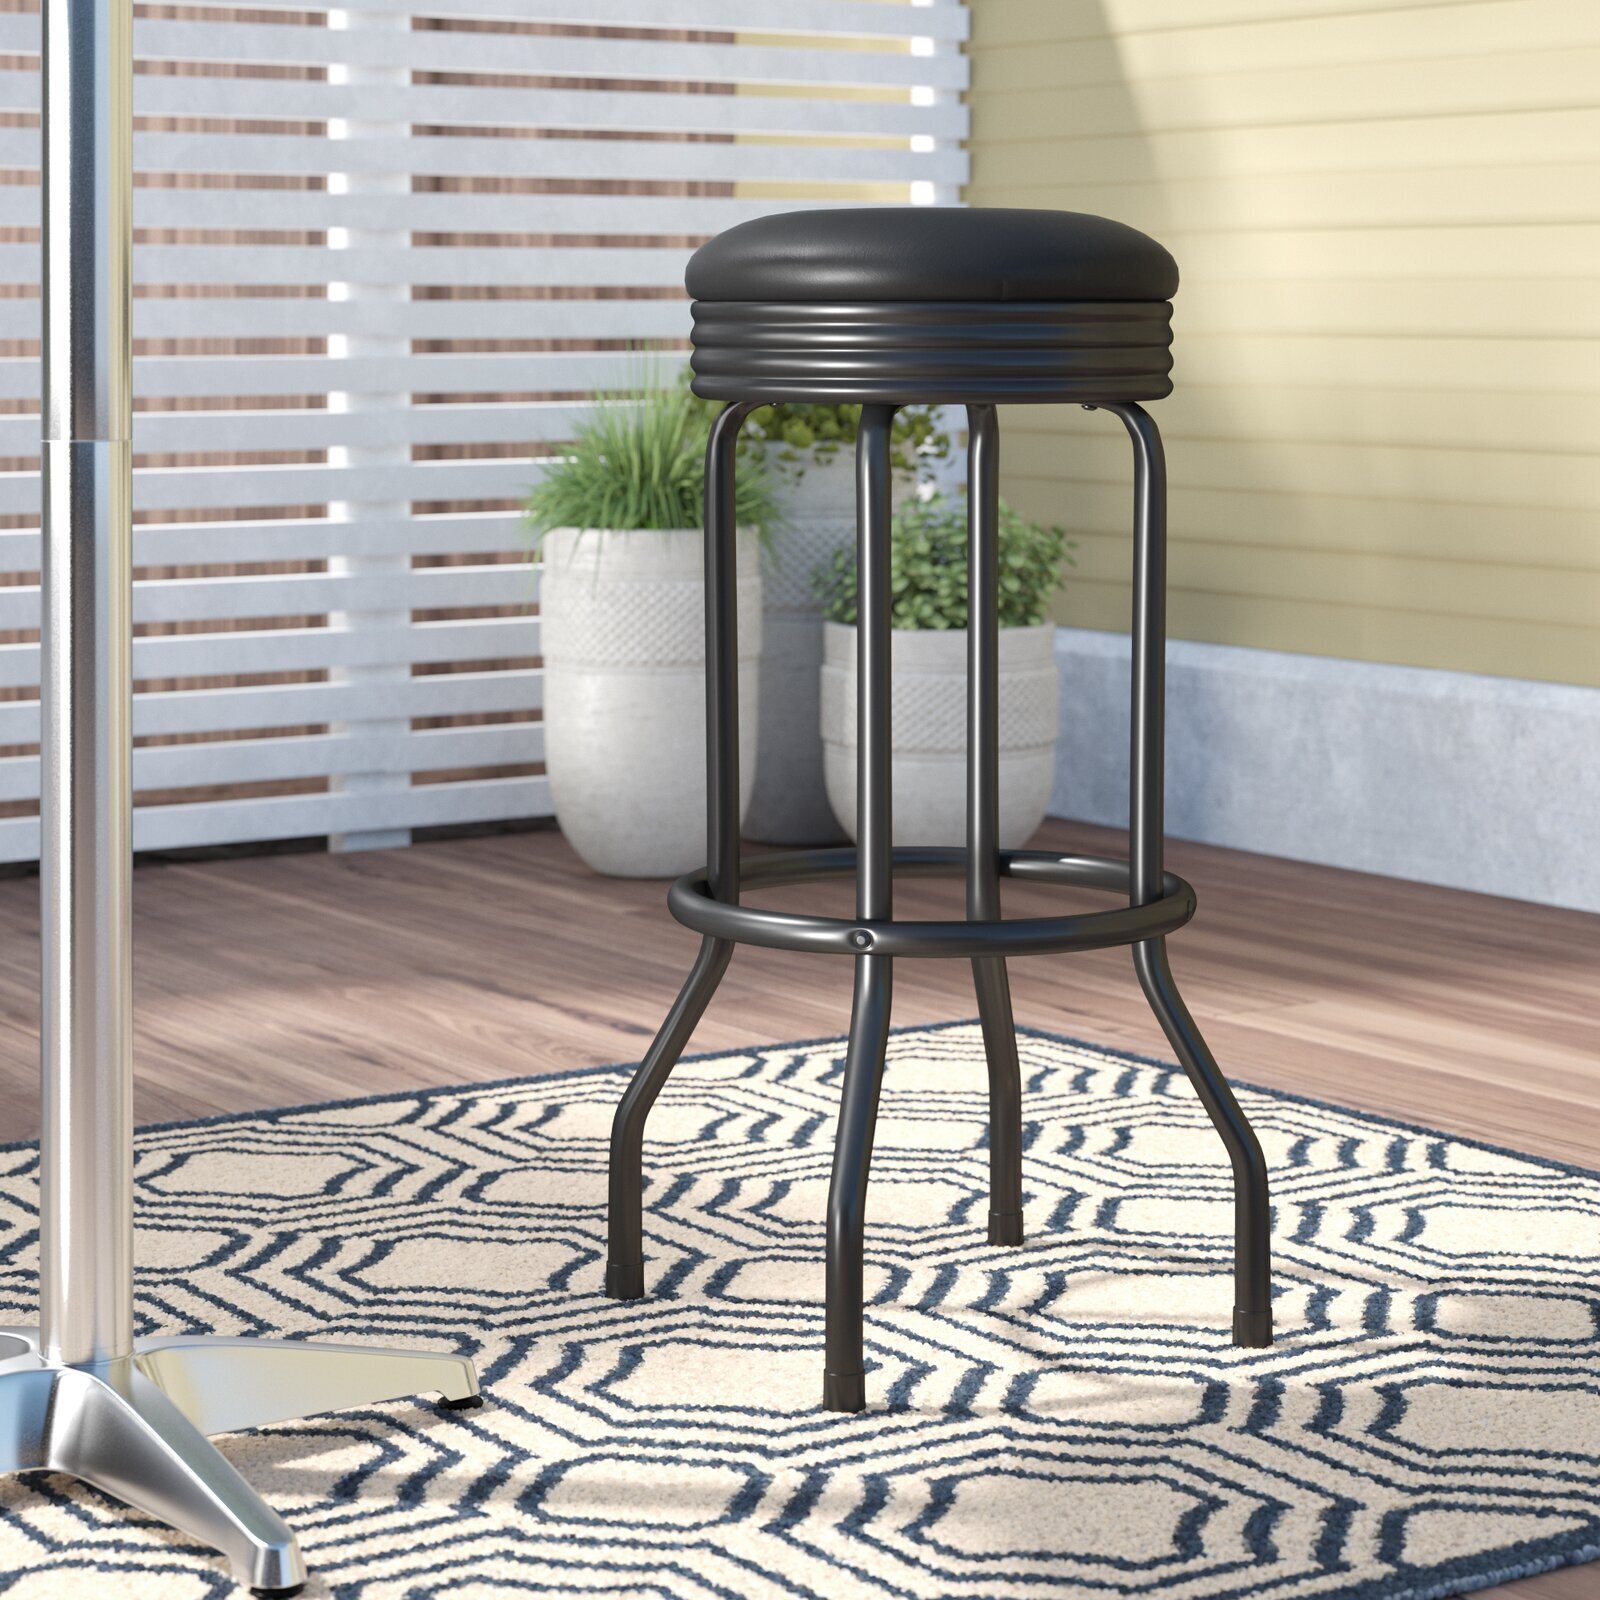 Backless outdoor bar stool with swivel seat